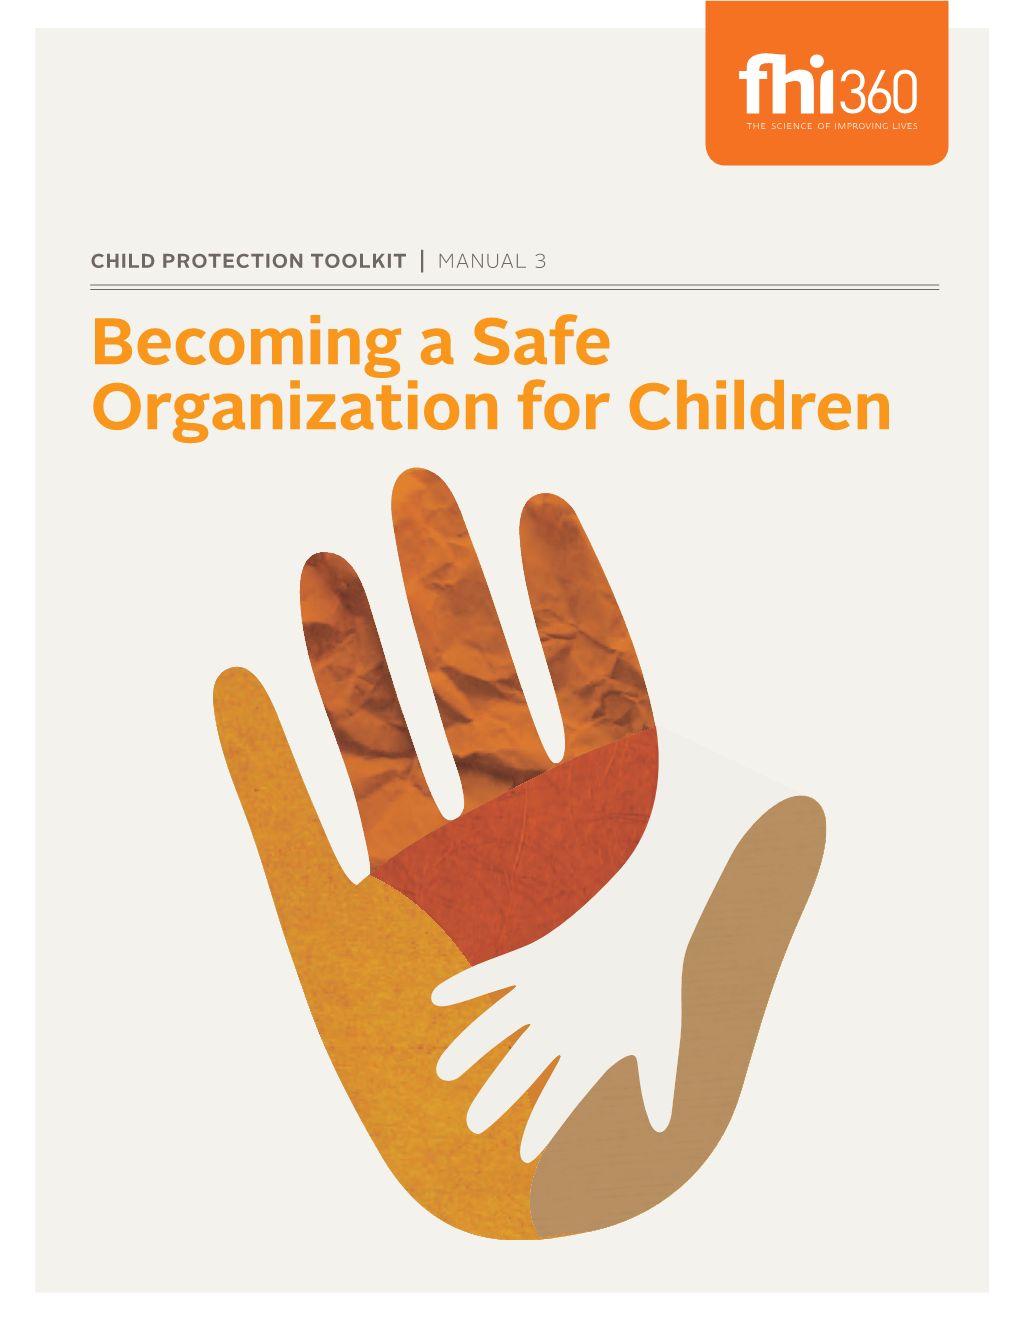 Becoming a Safe Organization for Children Manual 3: Becoming a Safe Organization for Children; FHI 360 Child Protection Toolkit © 2012 by FHI 360